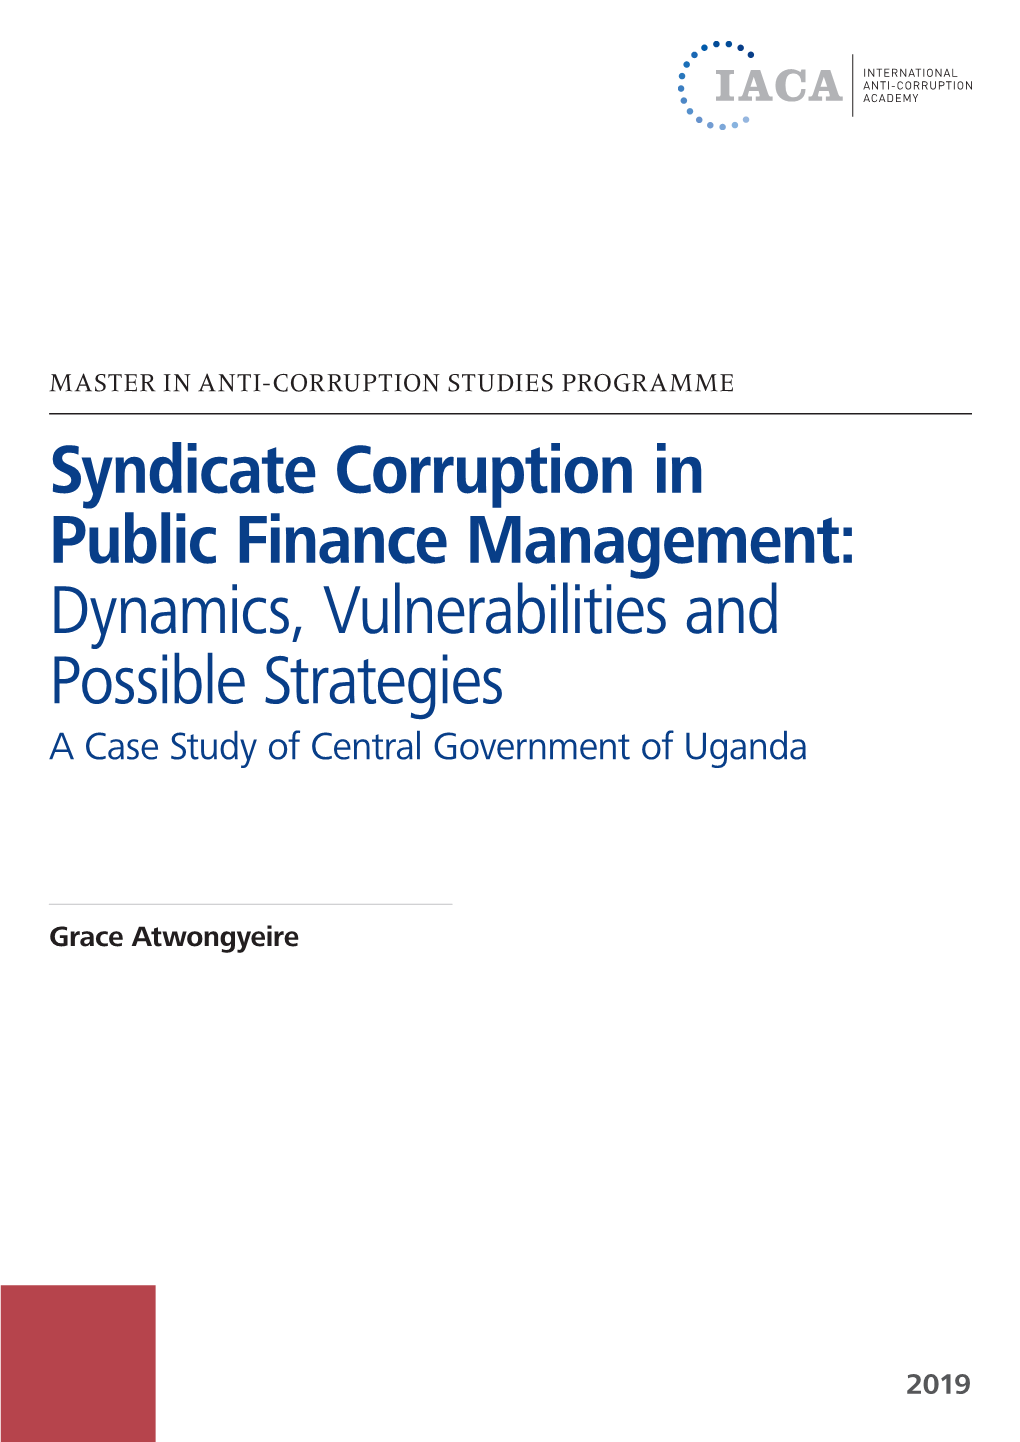 Syndicate Corruption in Public Finance Management: Dynamics, Vulnerabilities and Possible Strategies a Case Study of Central Government of Uganda